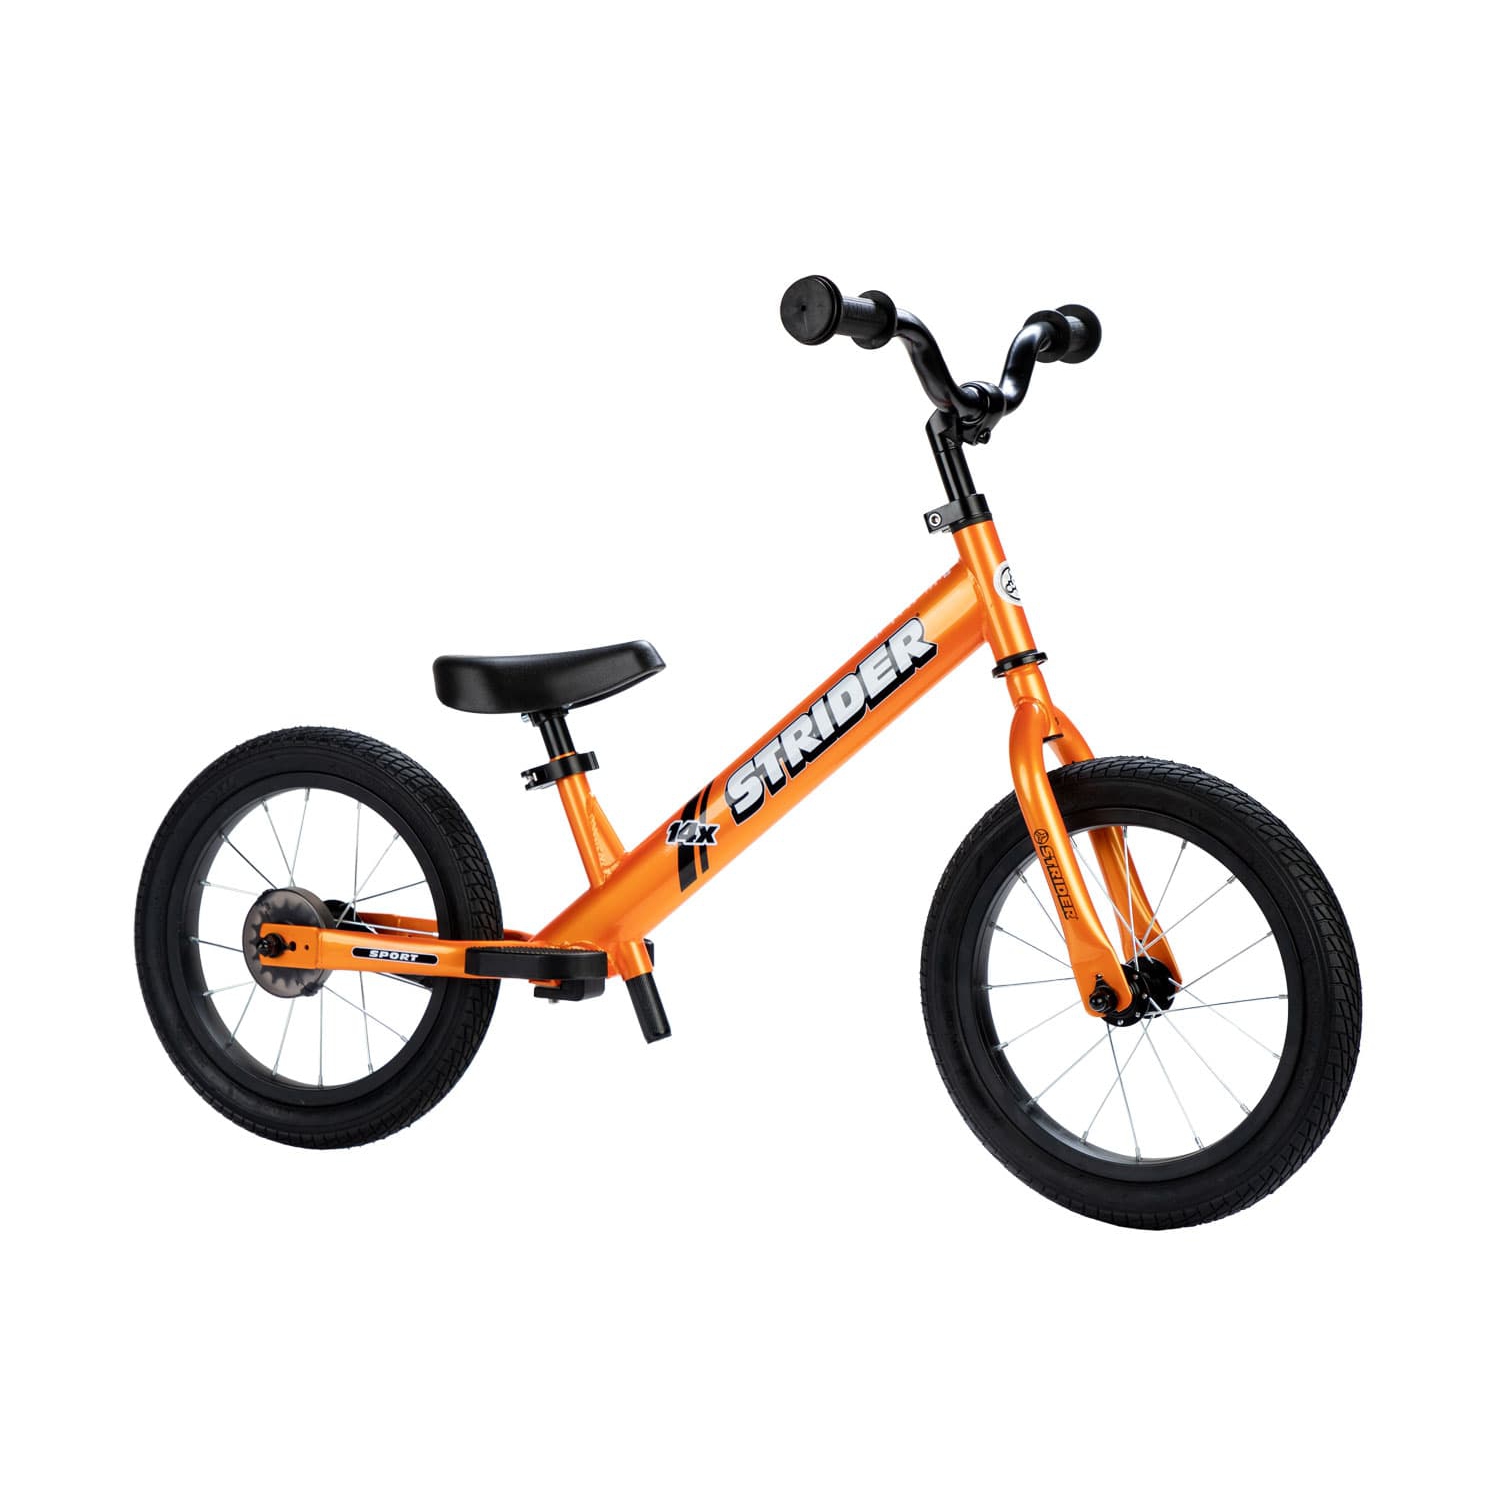 Strider 14x Sport Balance Bike, Ages 3 to 7 Years - Pedal Conversion Kit Sold Separately - Tangerine